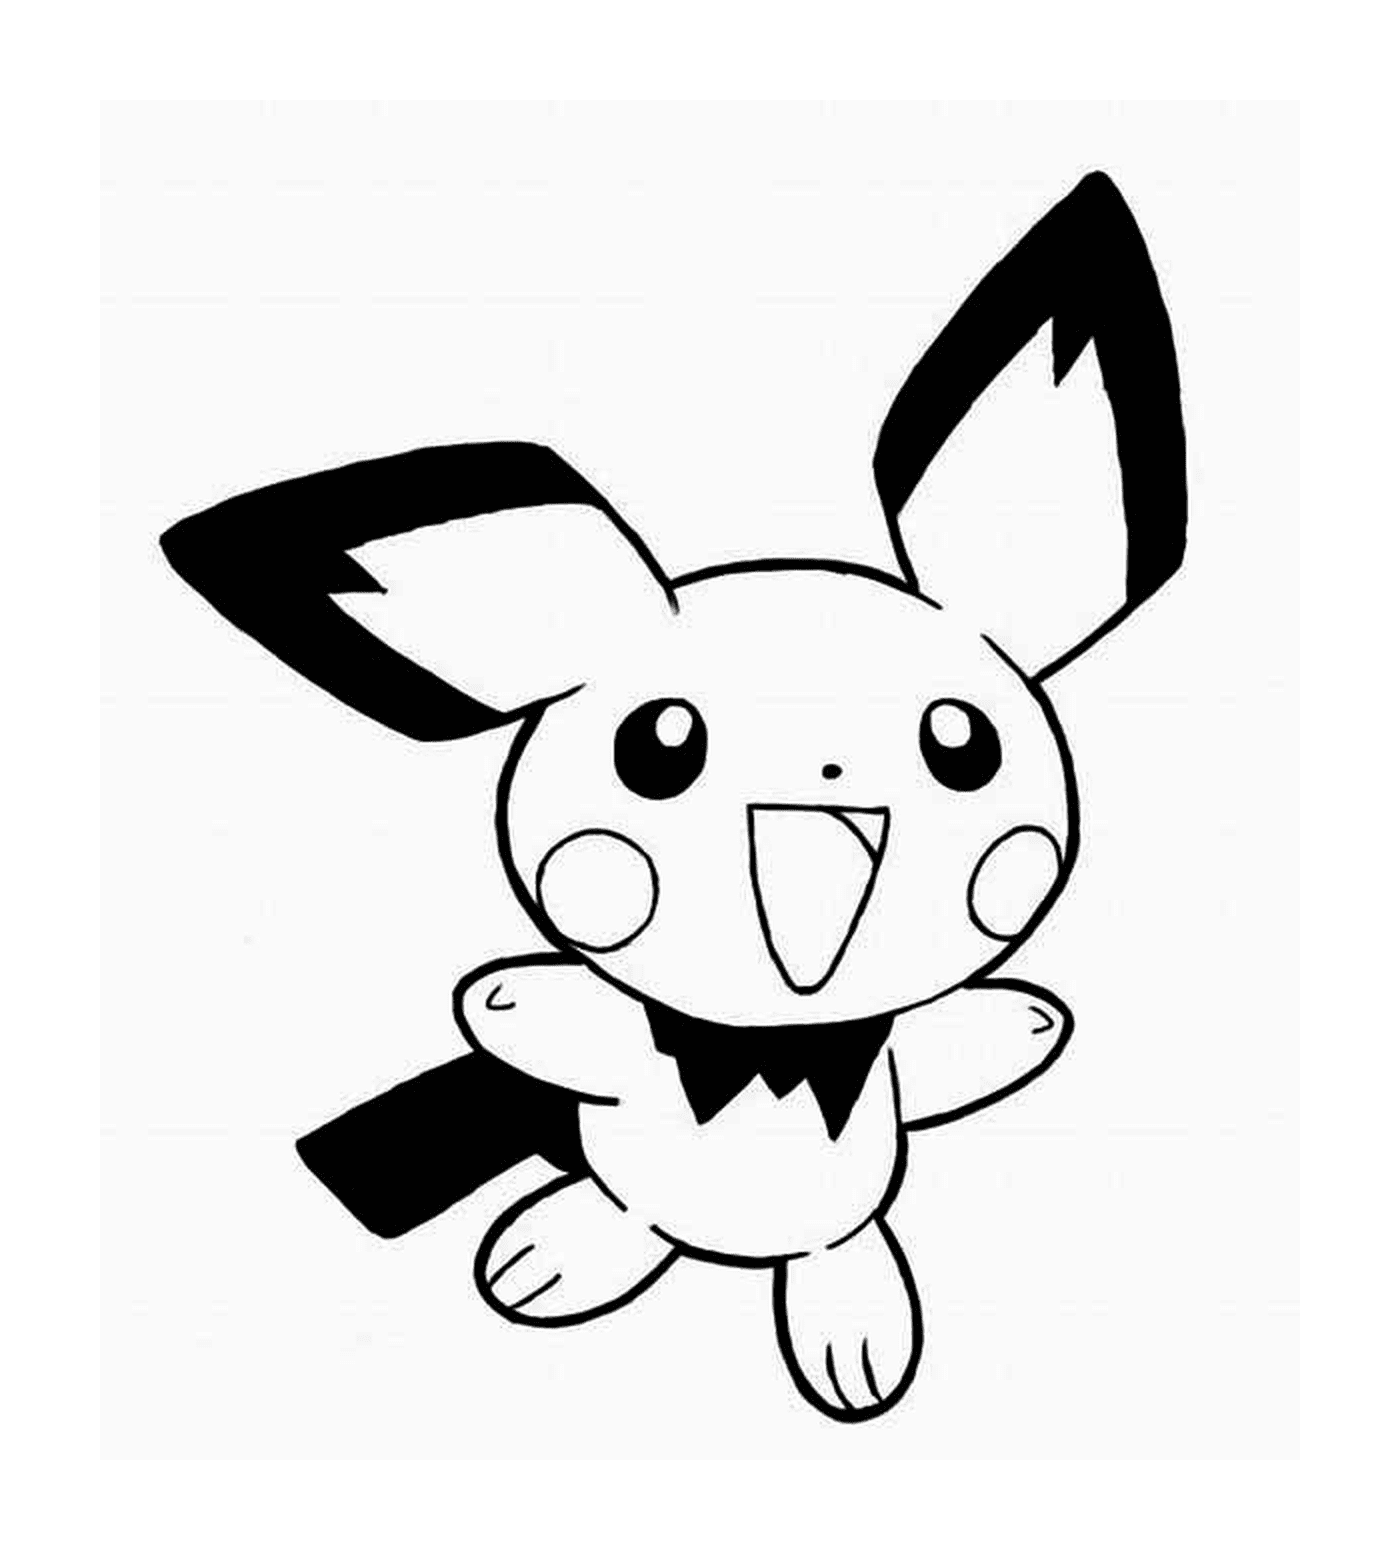  Pikachu with a cute expression 